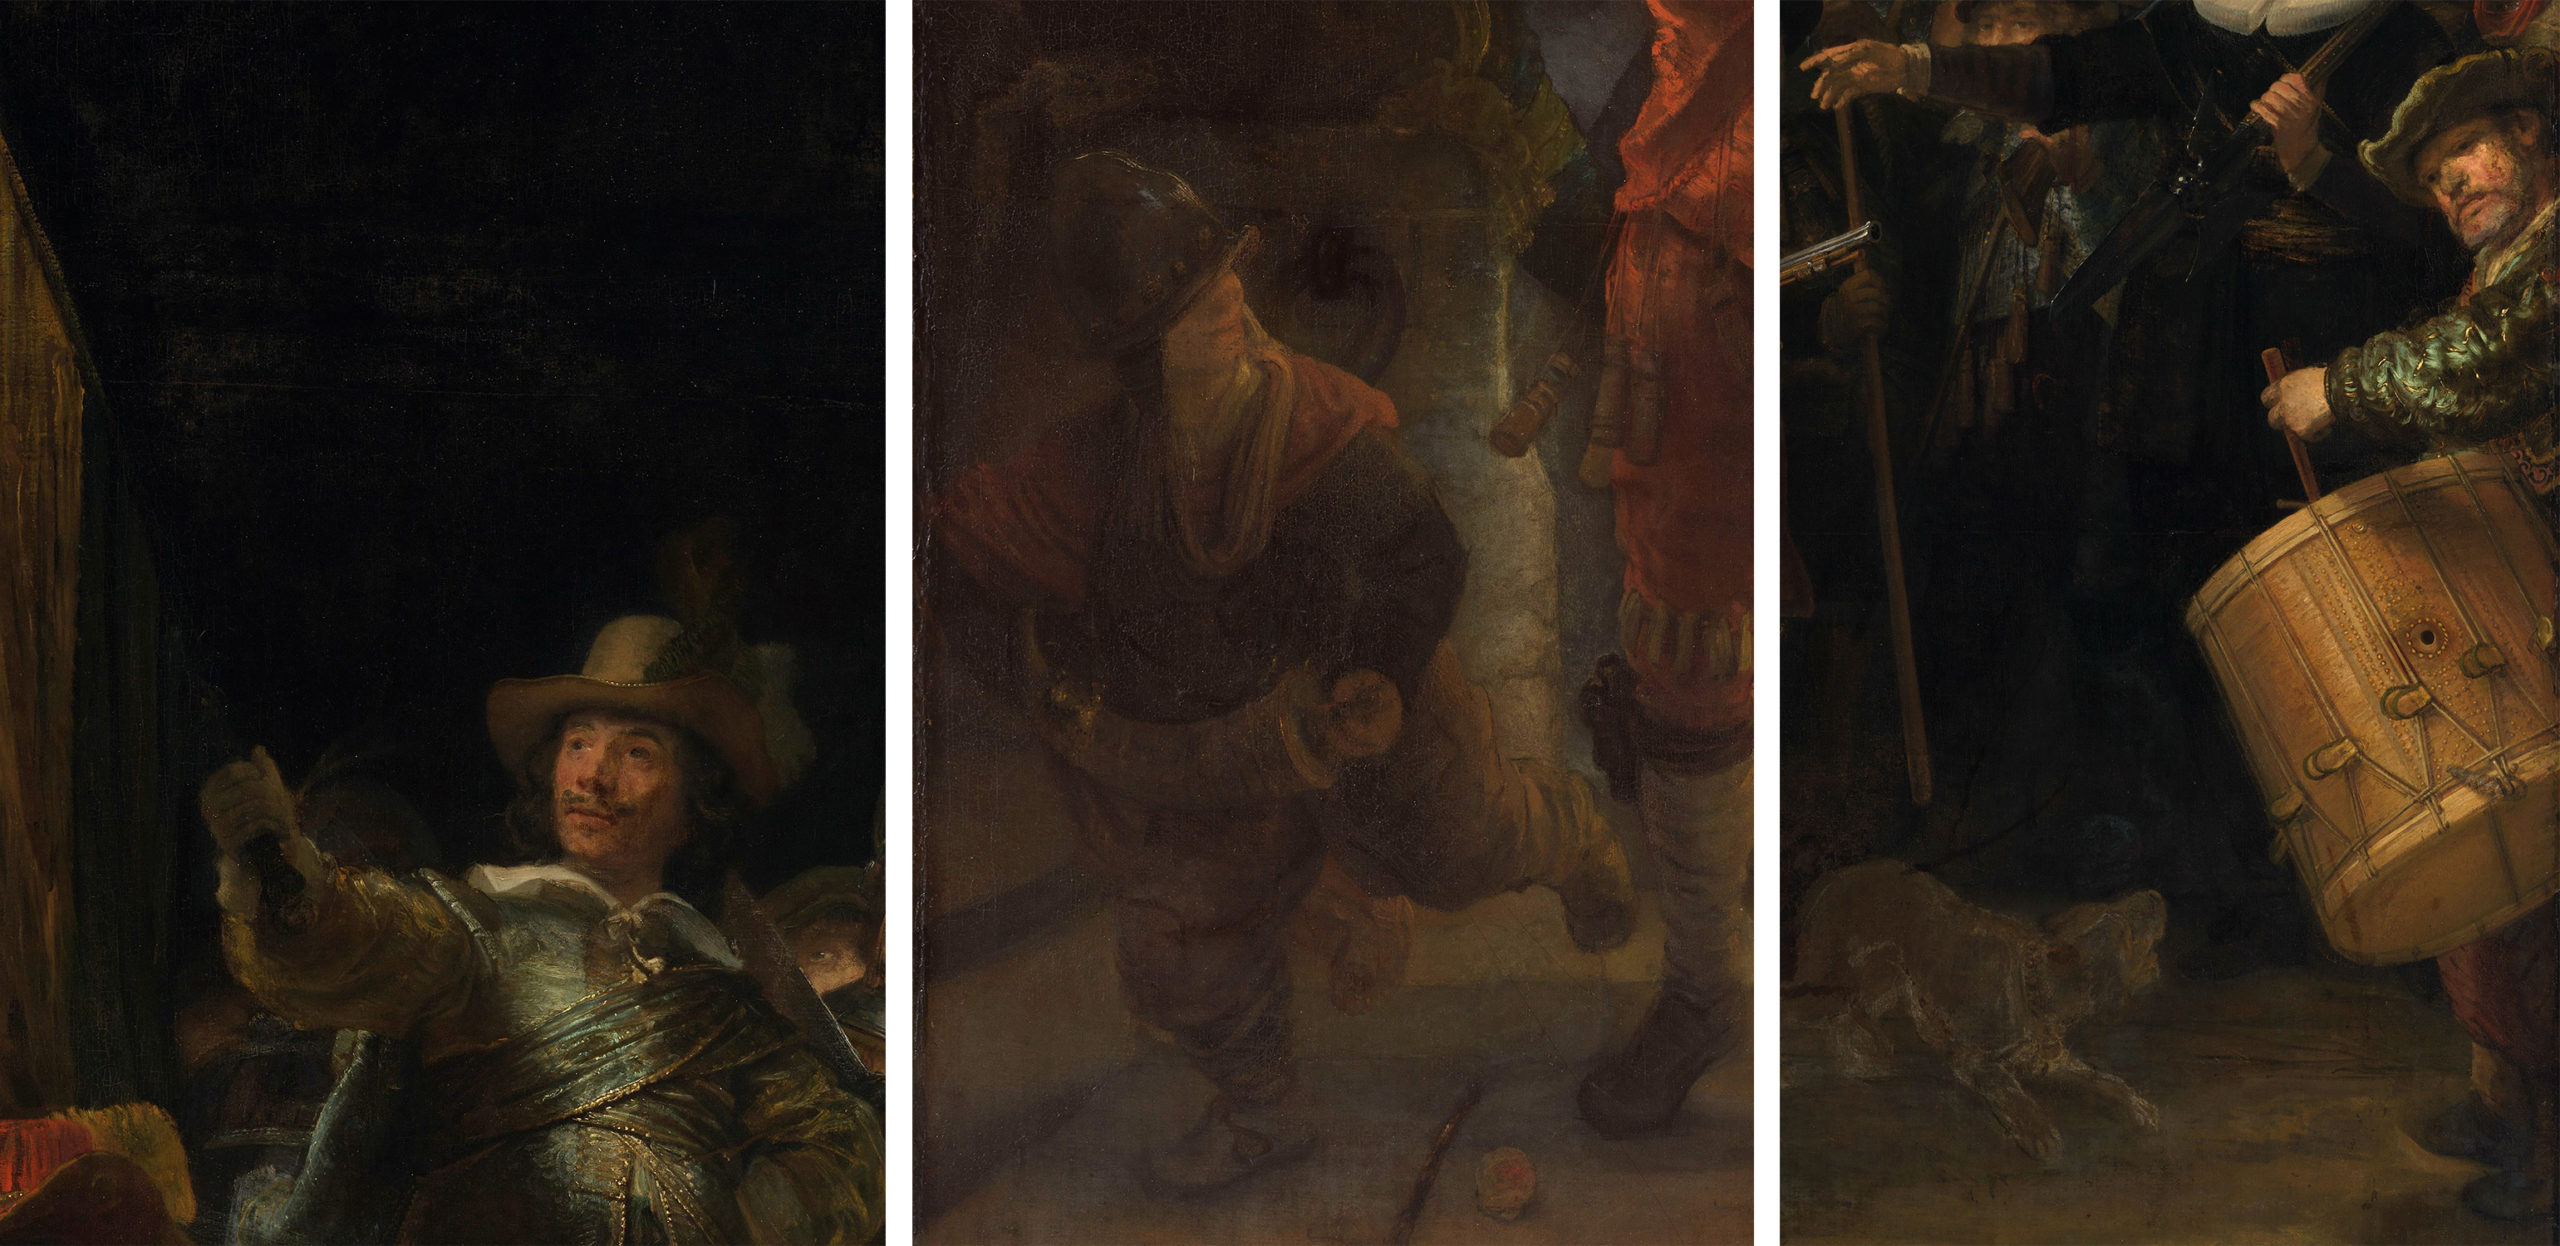 Details, left to right: Standard bearer, young boy with powder horn, and drummer with dog, Rembrandt van Rijn, The Night Watch, 1642, oil on canvas, 379.5 x 453.5 cm (Rijksmuseum, Amsterdam, Netherlands)